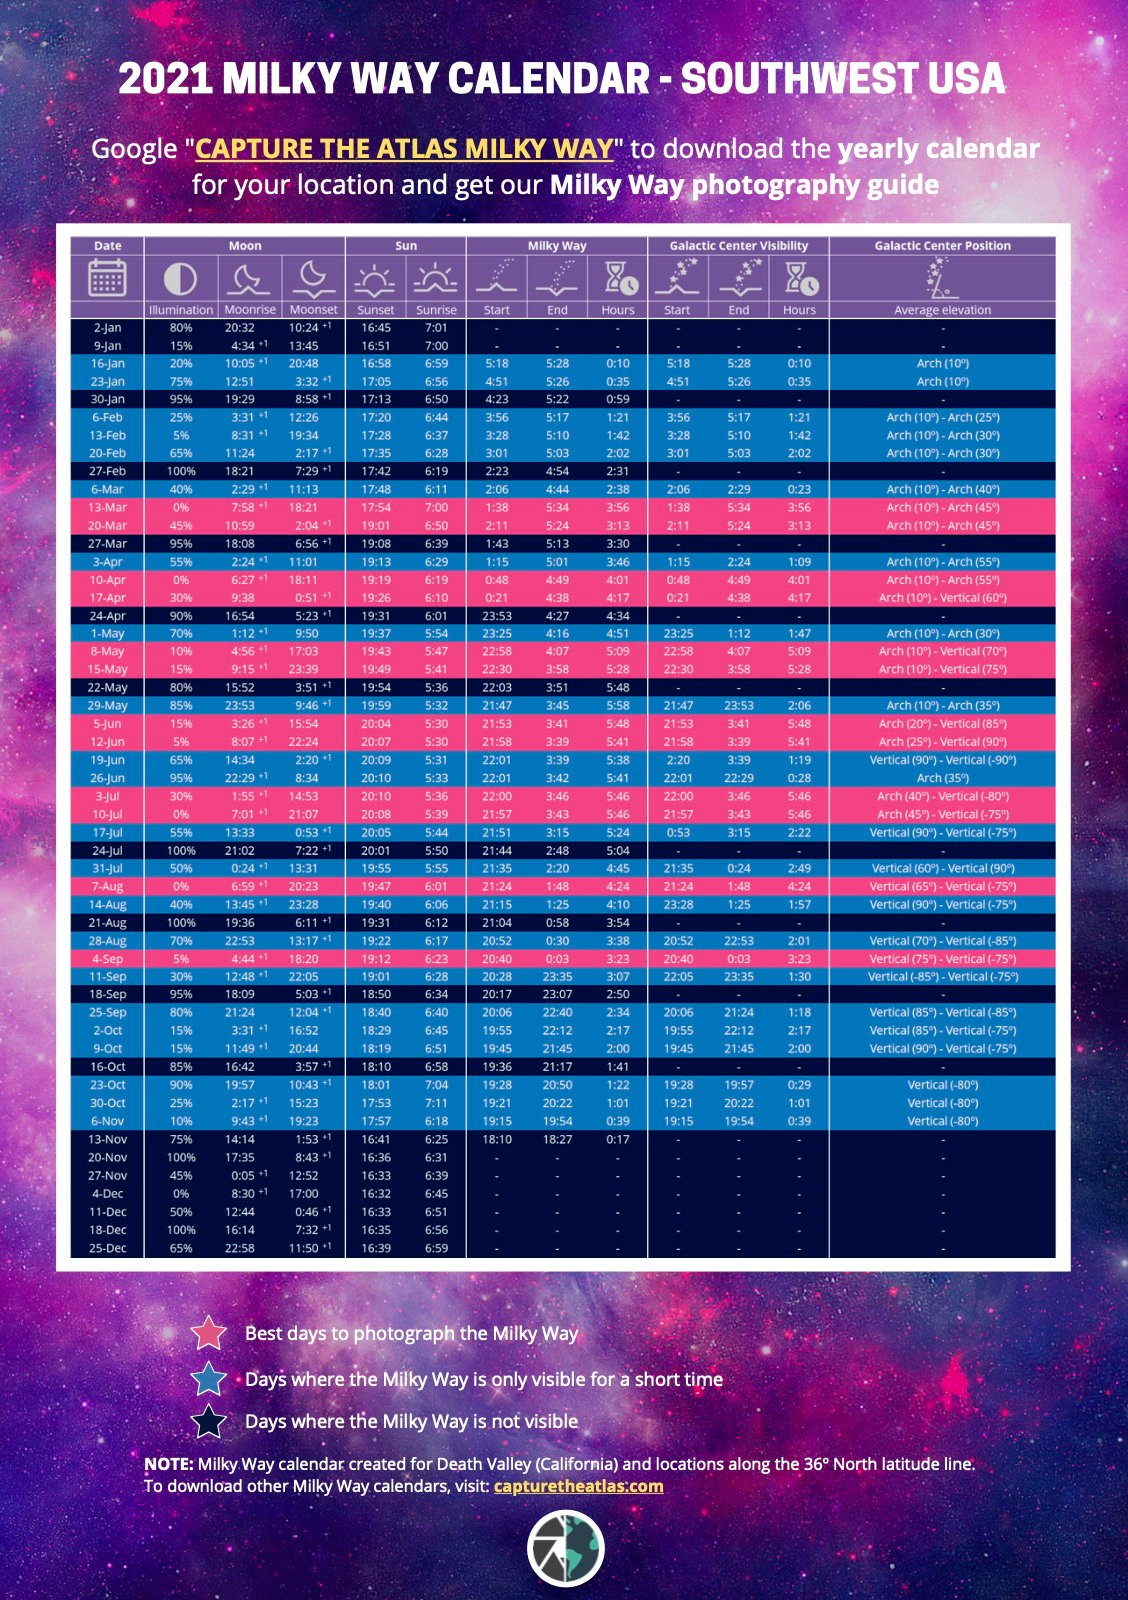 Milky Way Viewing Calendar 2022 Use This Astro Calendar To Plan Your Milky Way Shots This Year | Petapixel